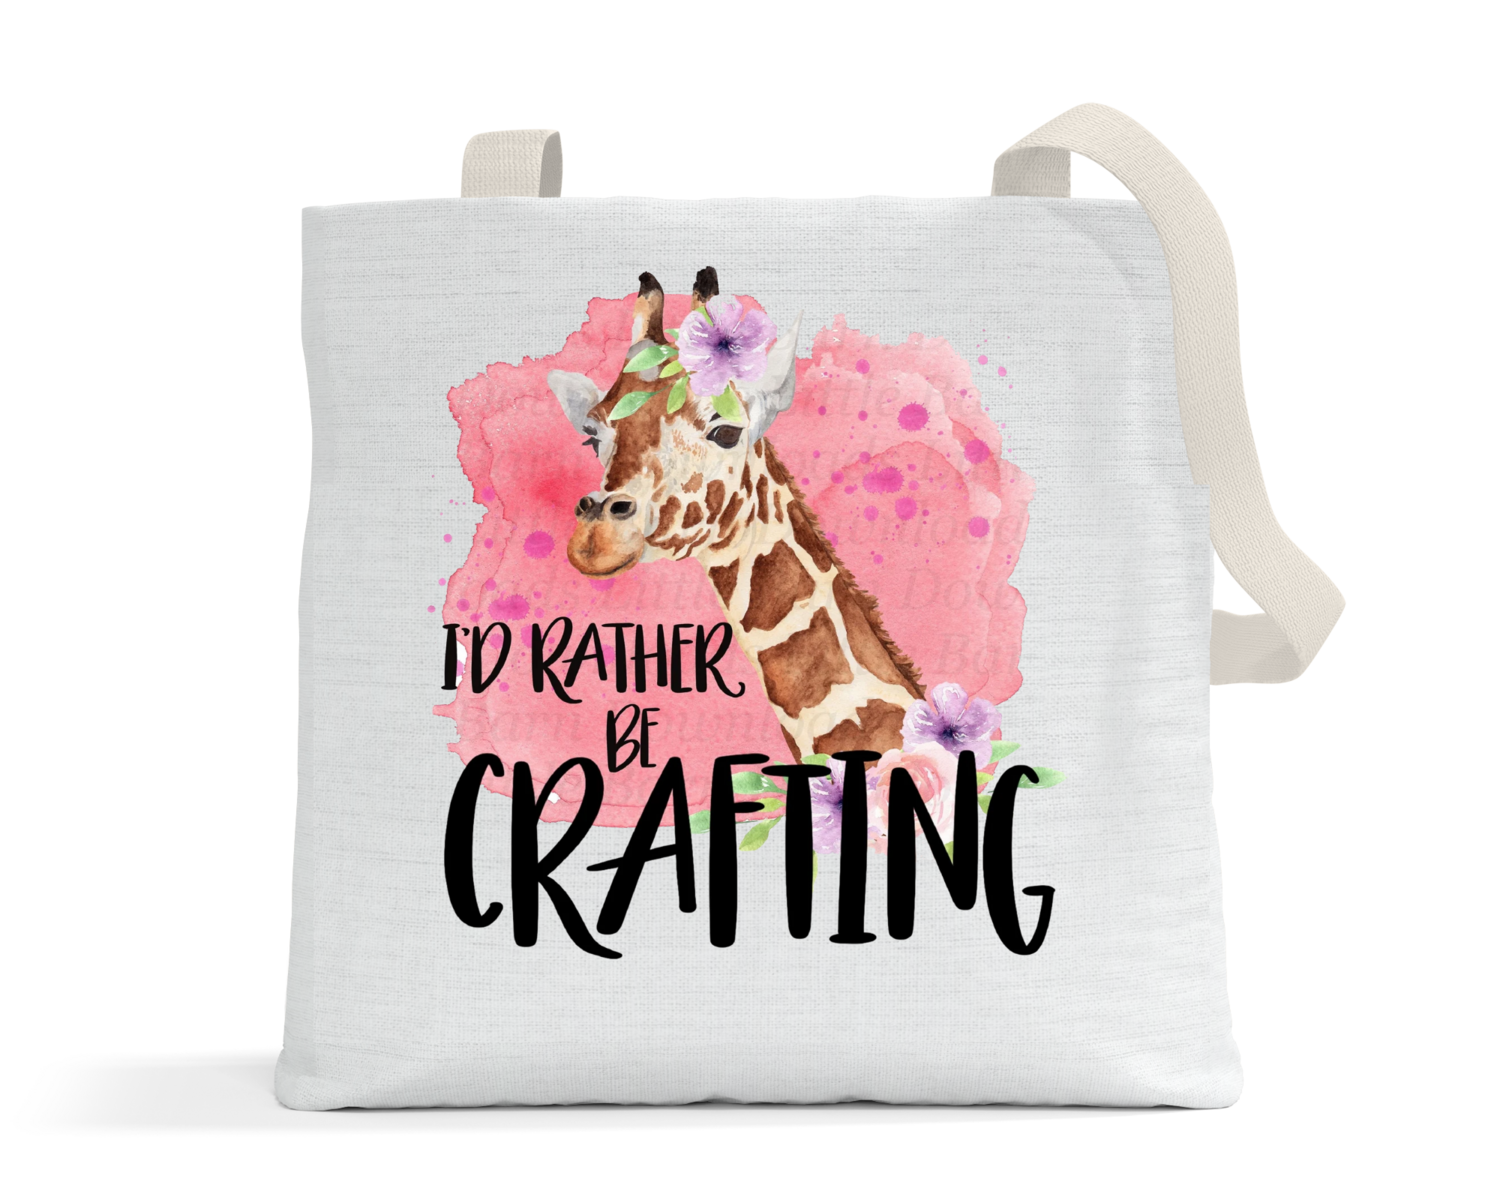 Crafting Tote Bag: I'D RATHER BE CRAFTING